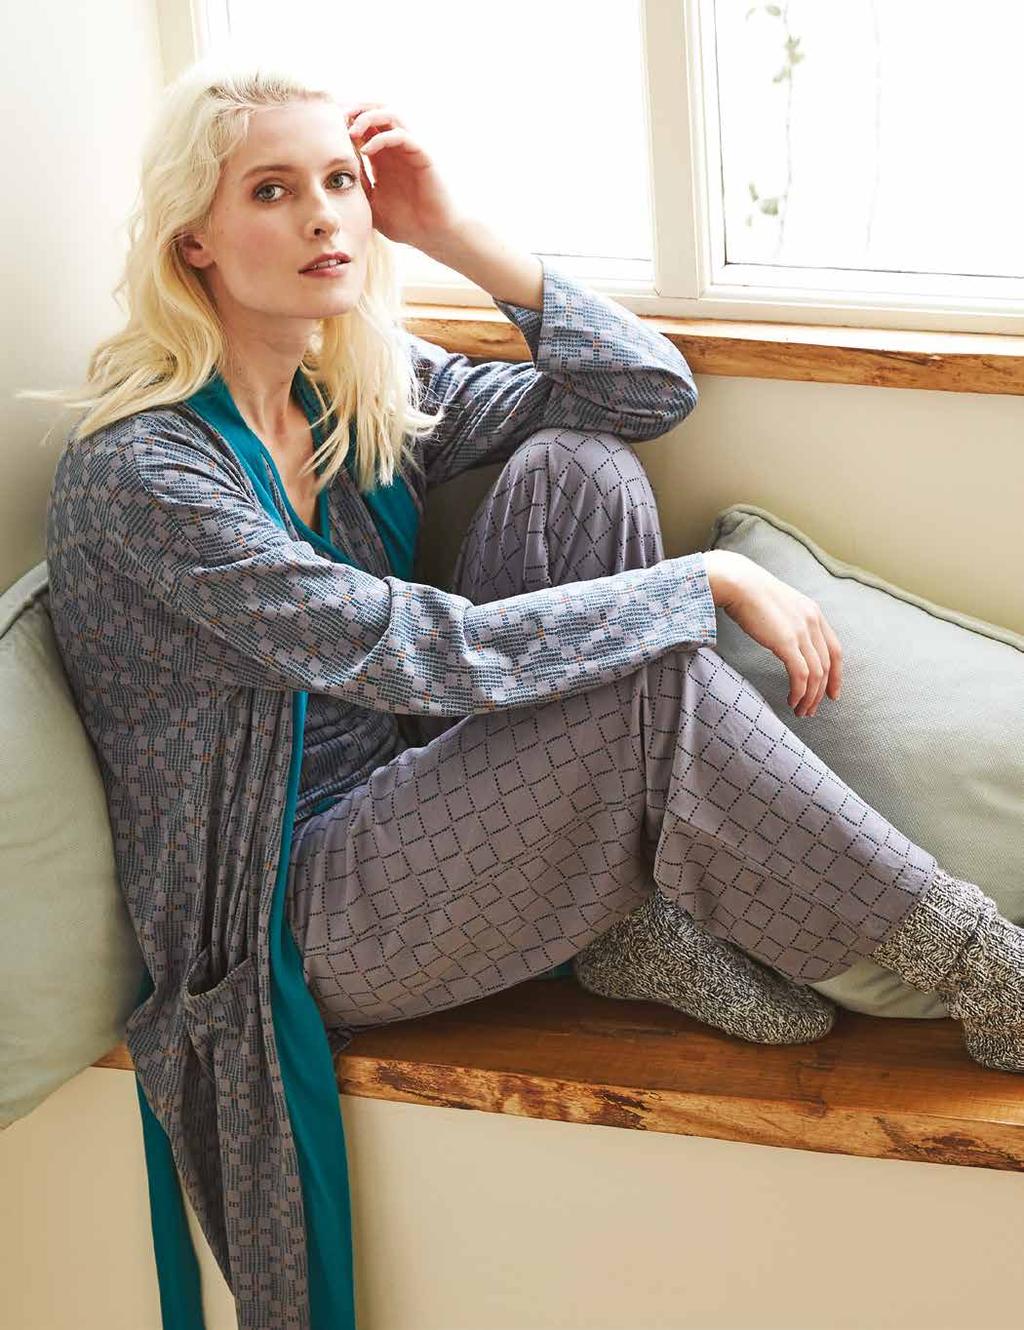 Printed Dressing Gown NA9505 Organic Brushed Cotton Jersey Silver Sizes S, M, L 52 Tairu Pyjama Bottoms NB9504 Organic Brushed Cotton Jersey Silver Sizes S, M, L 35 How to Order www.nomadsclothing.